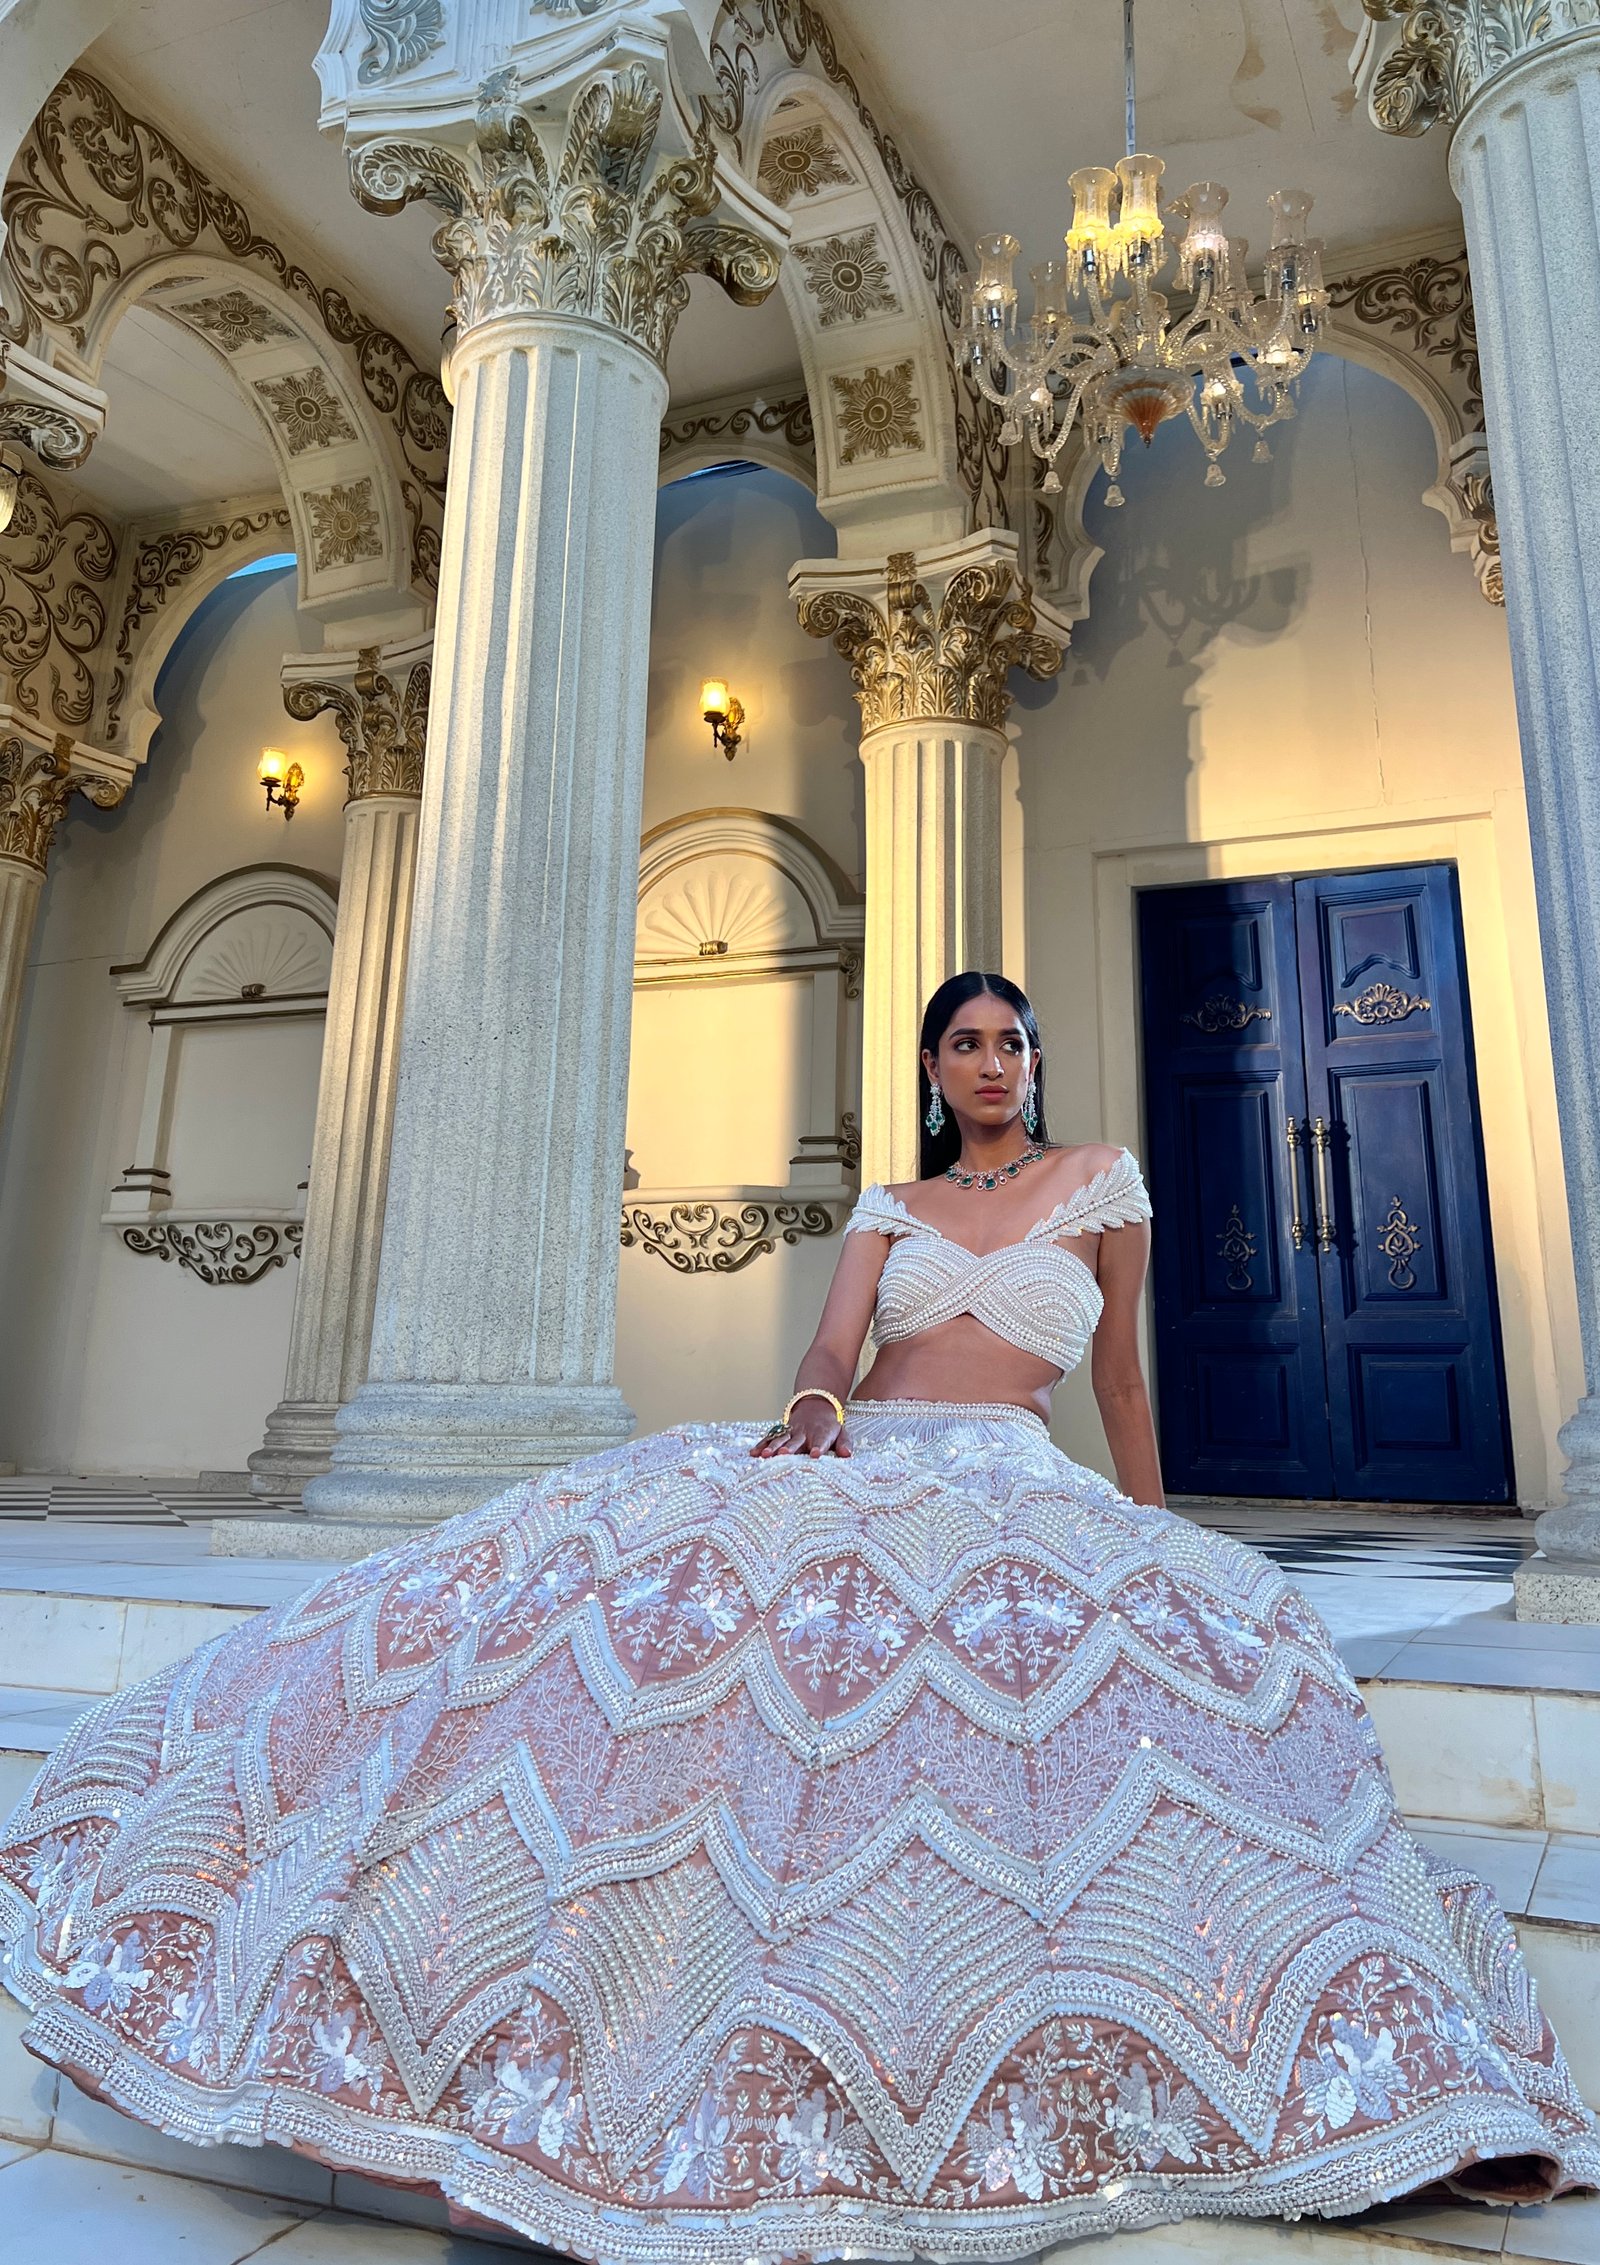 Rianta’s by Rianta Chakraborty: A Journey from Dreams to Haute Couture